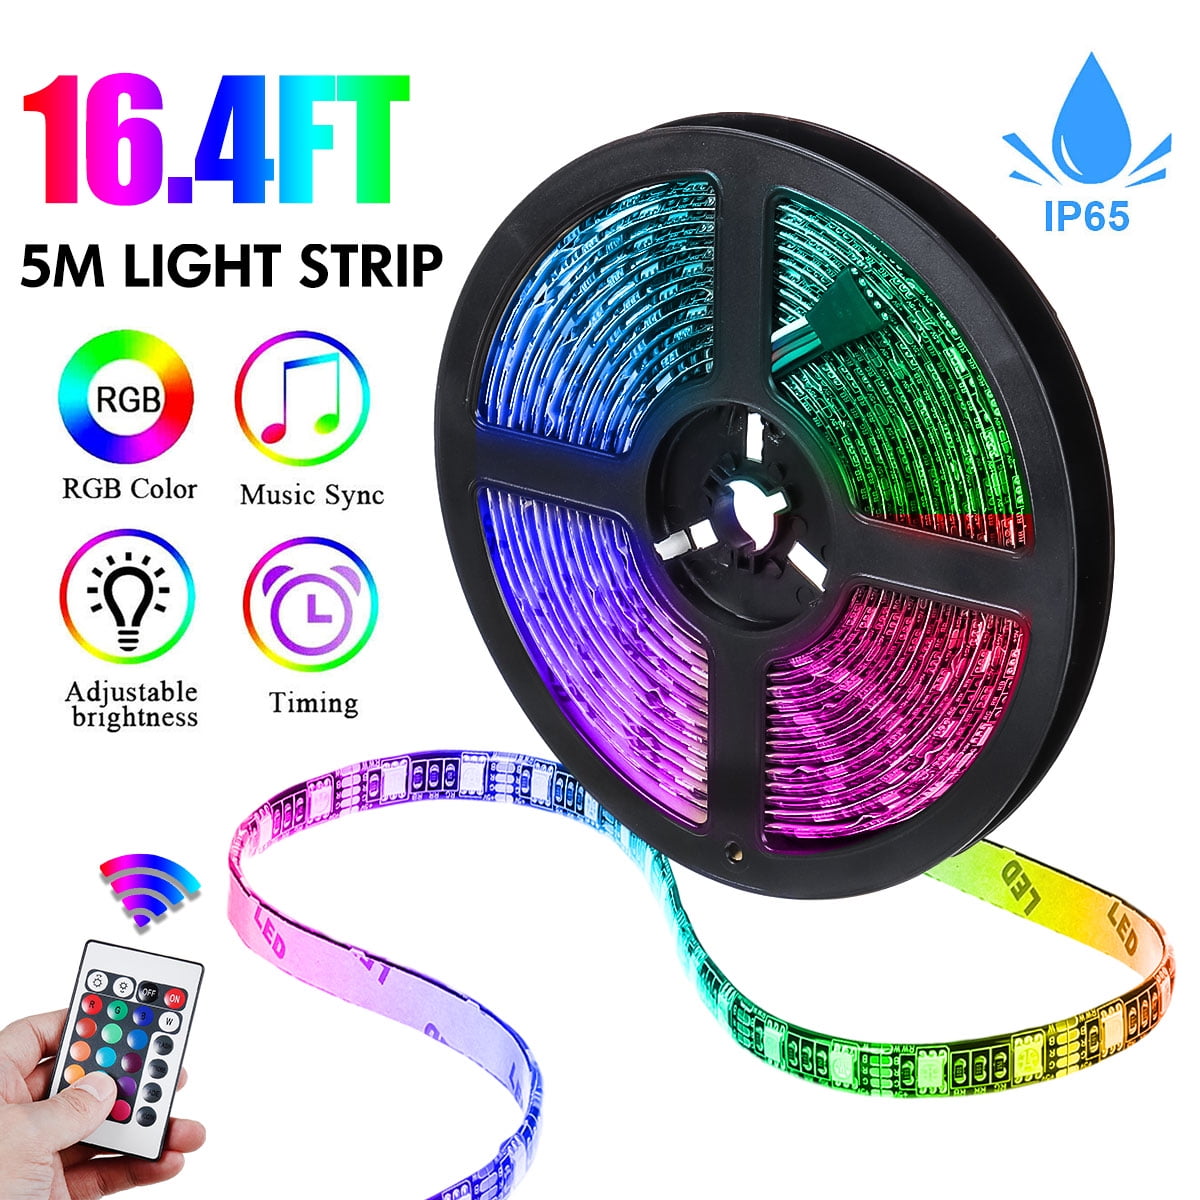 Party Google Home Brighter 5050 LED 16 Million Colors Phone App Controlled Music Light Strip for Home for iOS and Android Smart WiFi LED Strip Lights Compatible with Alexa Kitchen TV 